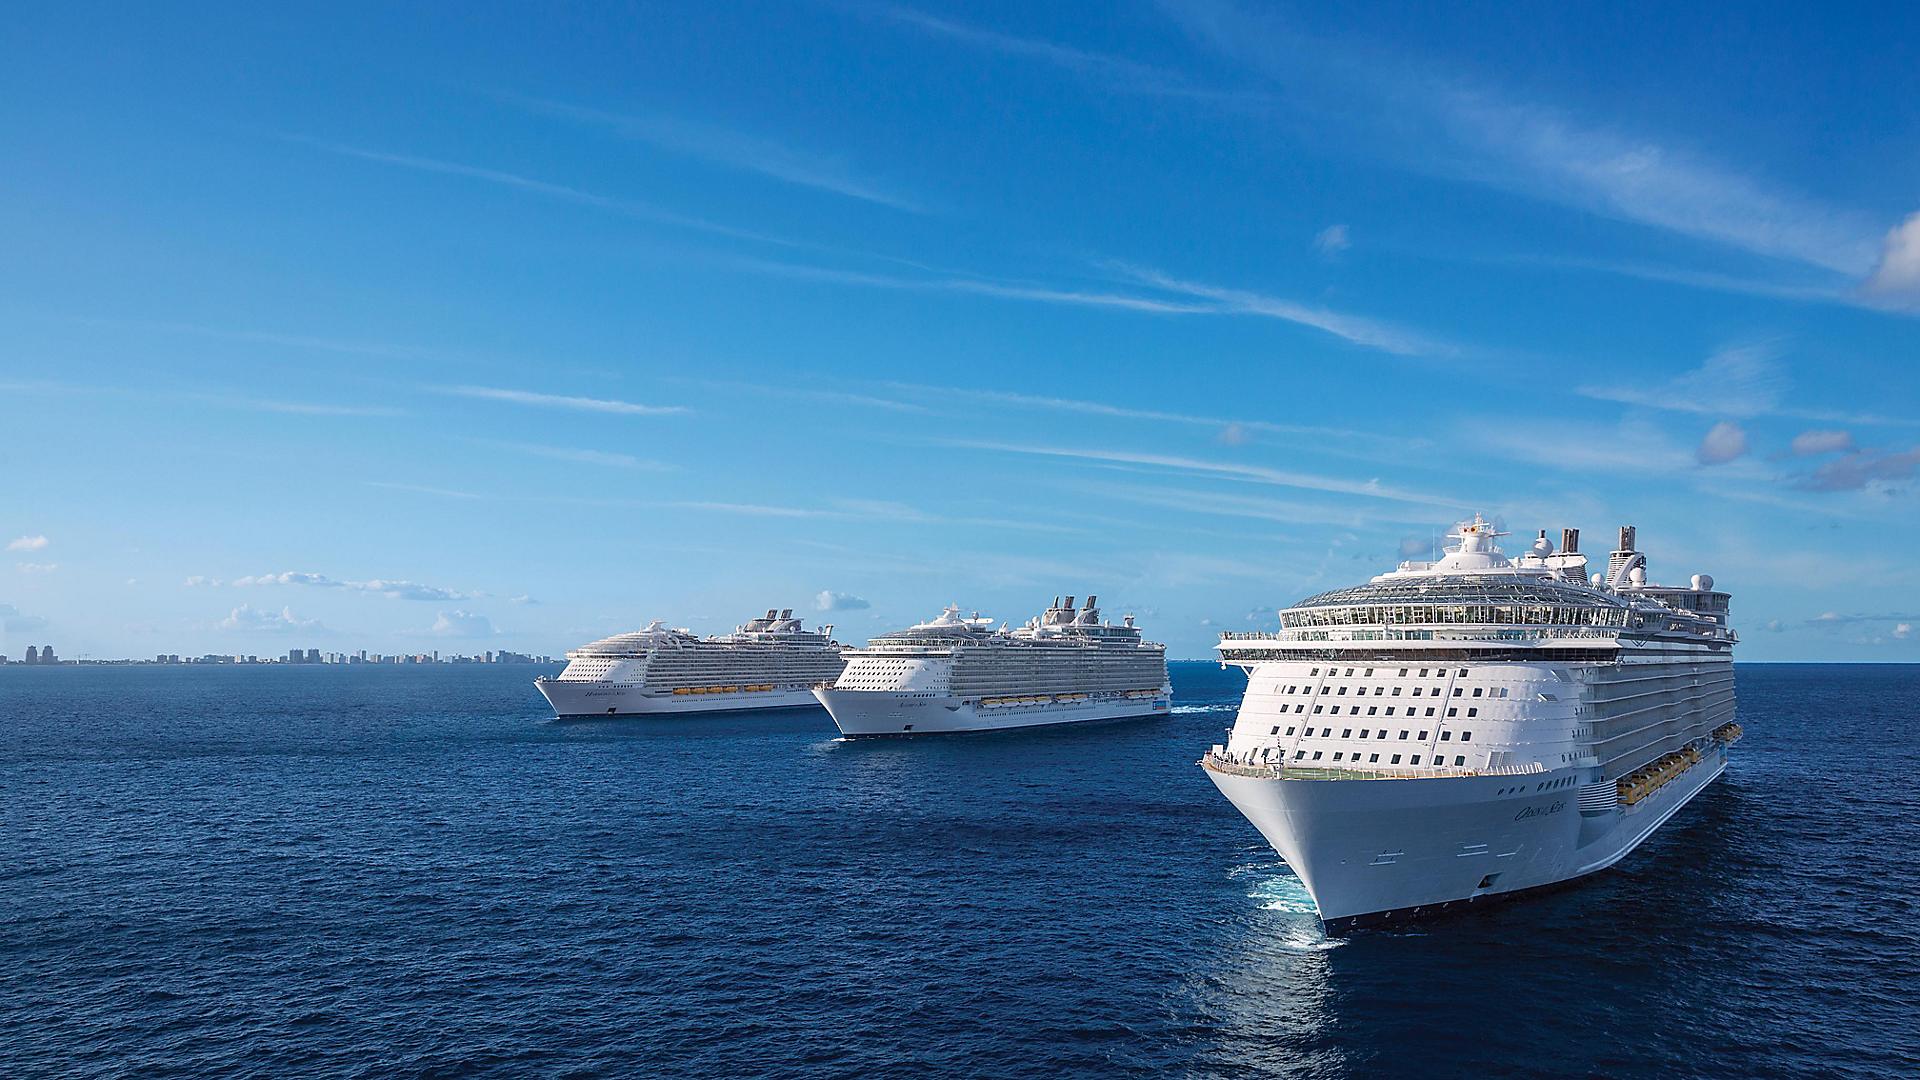 Image of Oasis-class Sister Ships, sourced from: Royal Caribbean International https://touristwire.com/wp-content/uploads/2023/06/oasis-class-sister-ships.hero.jpg